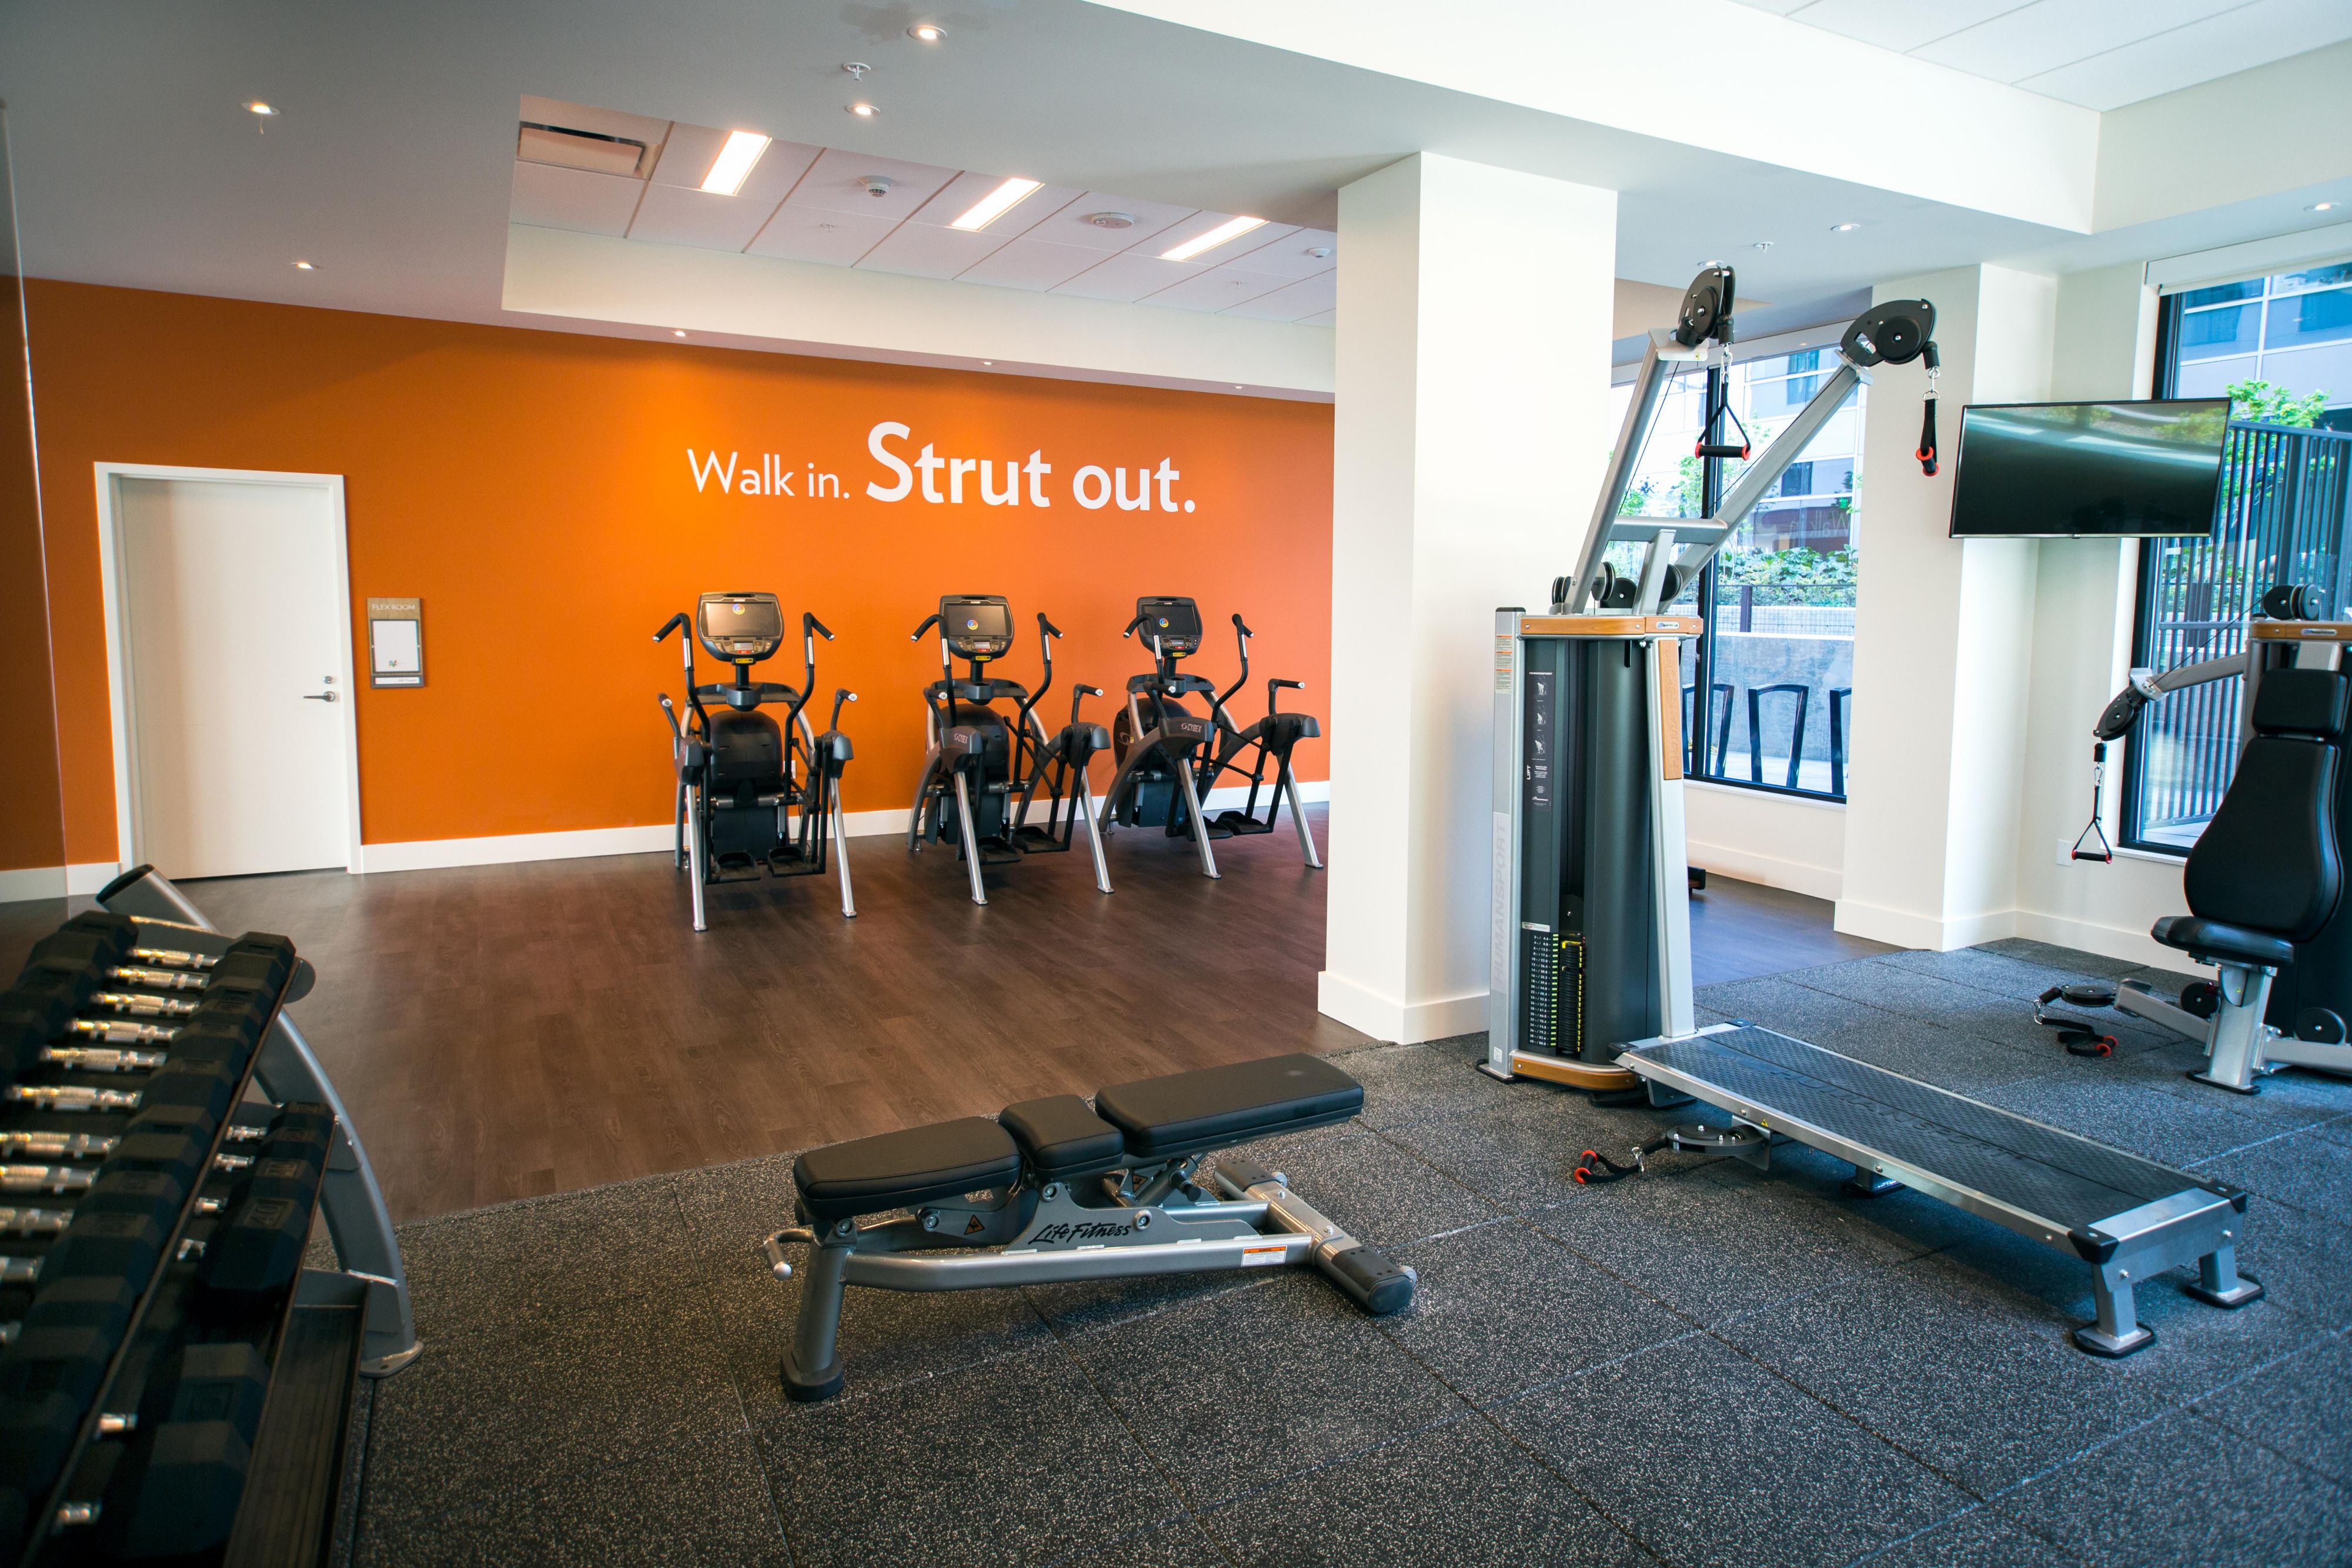 Access our 24/7 onsite gym to stay on top of your fitness routine no matter the time of day. Our best-in-class studio features fitness equipment needed for endurance, strength, flexibility, and balance workouts.